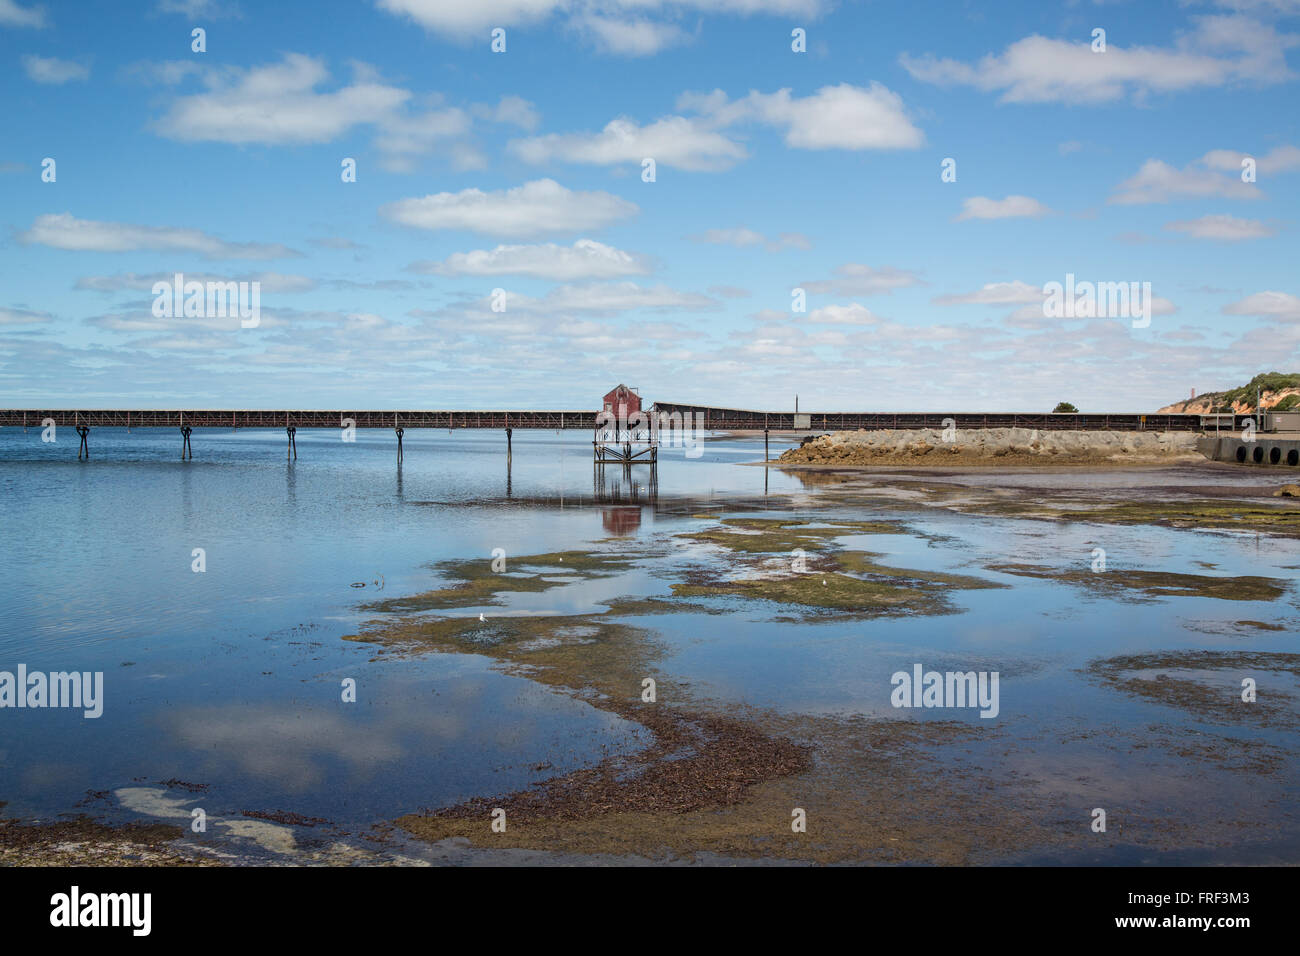 industrial loading jetty with red house, shallow water speckled with seaweed and sandbanks under blue sky with cumulus clouds Stock Photo